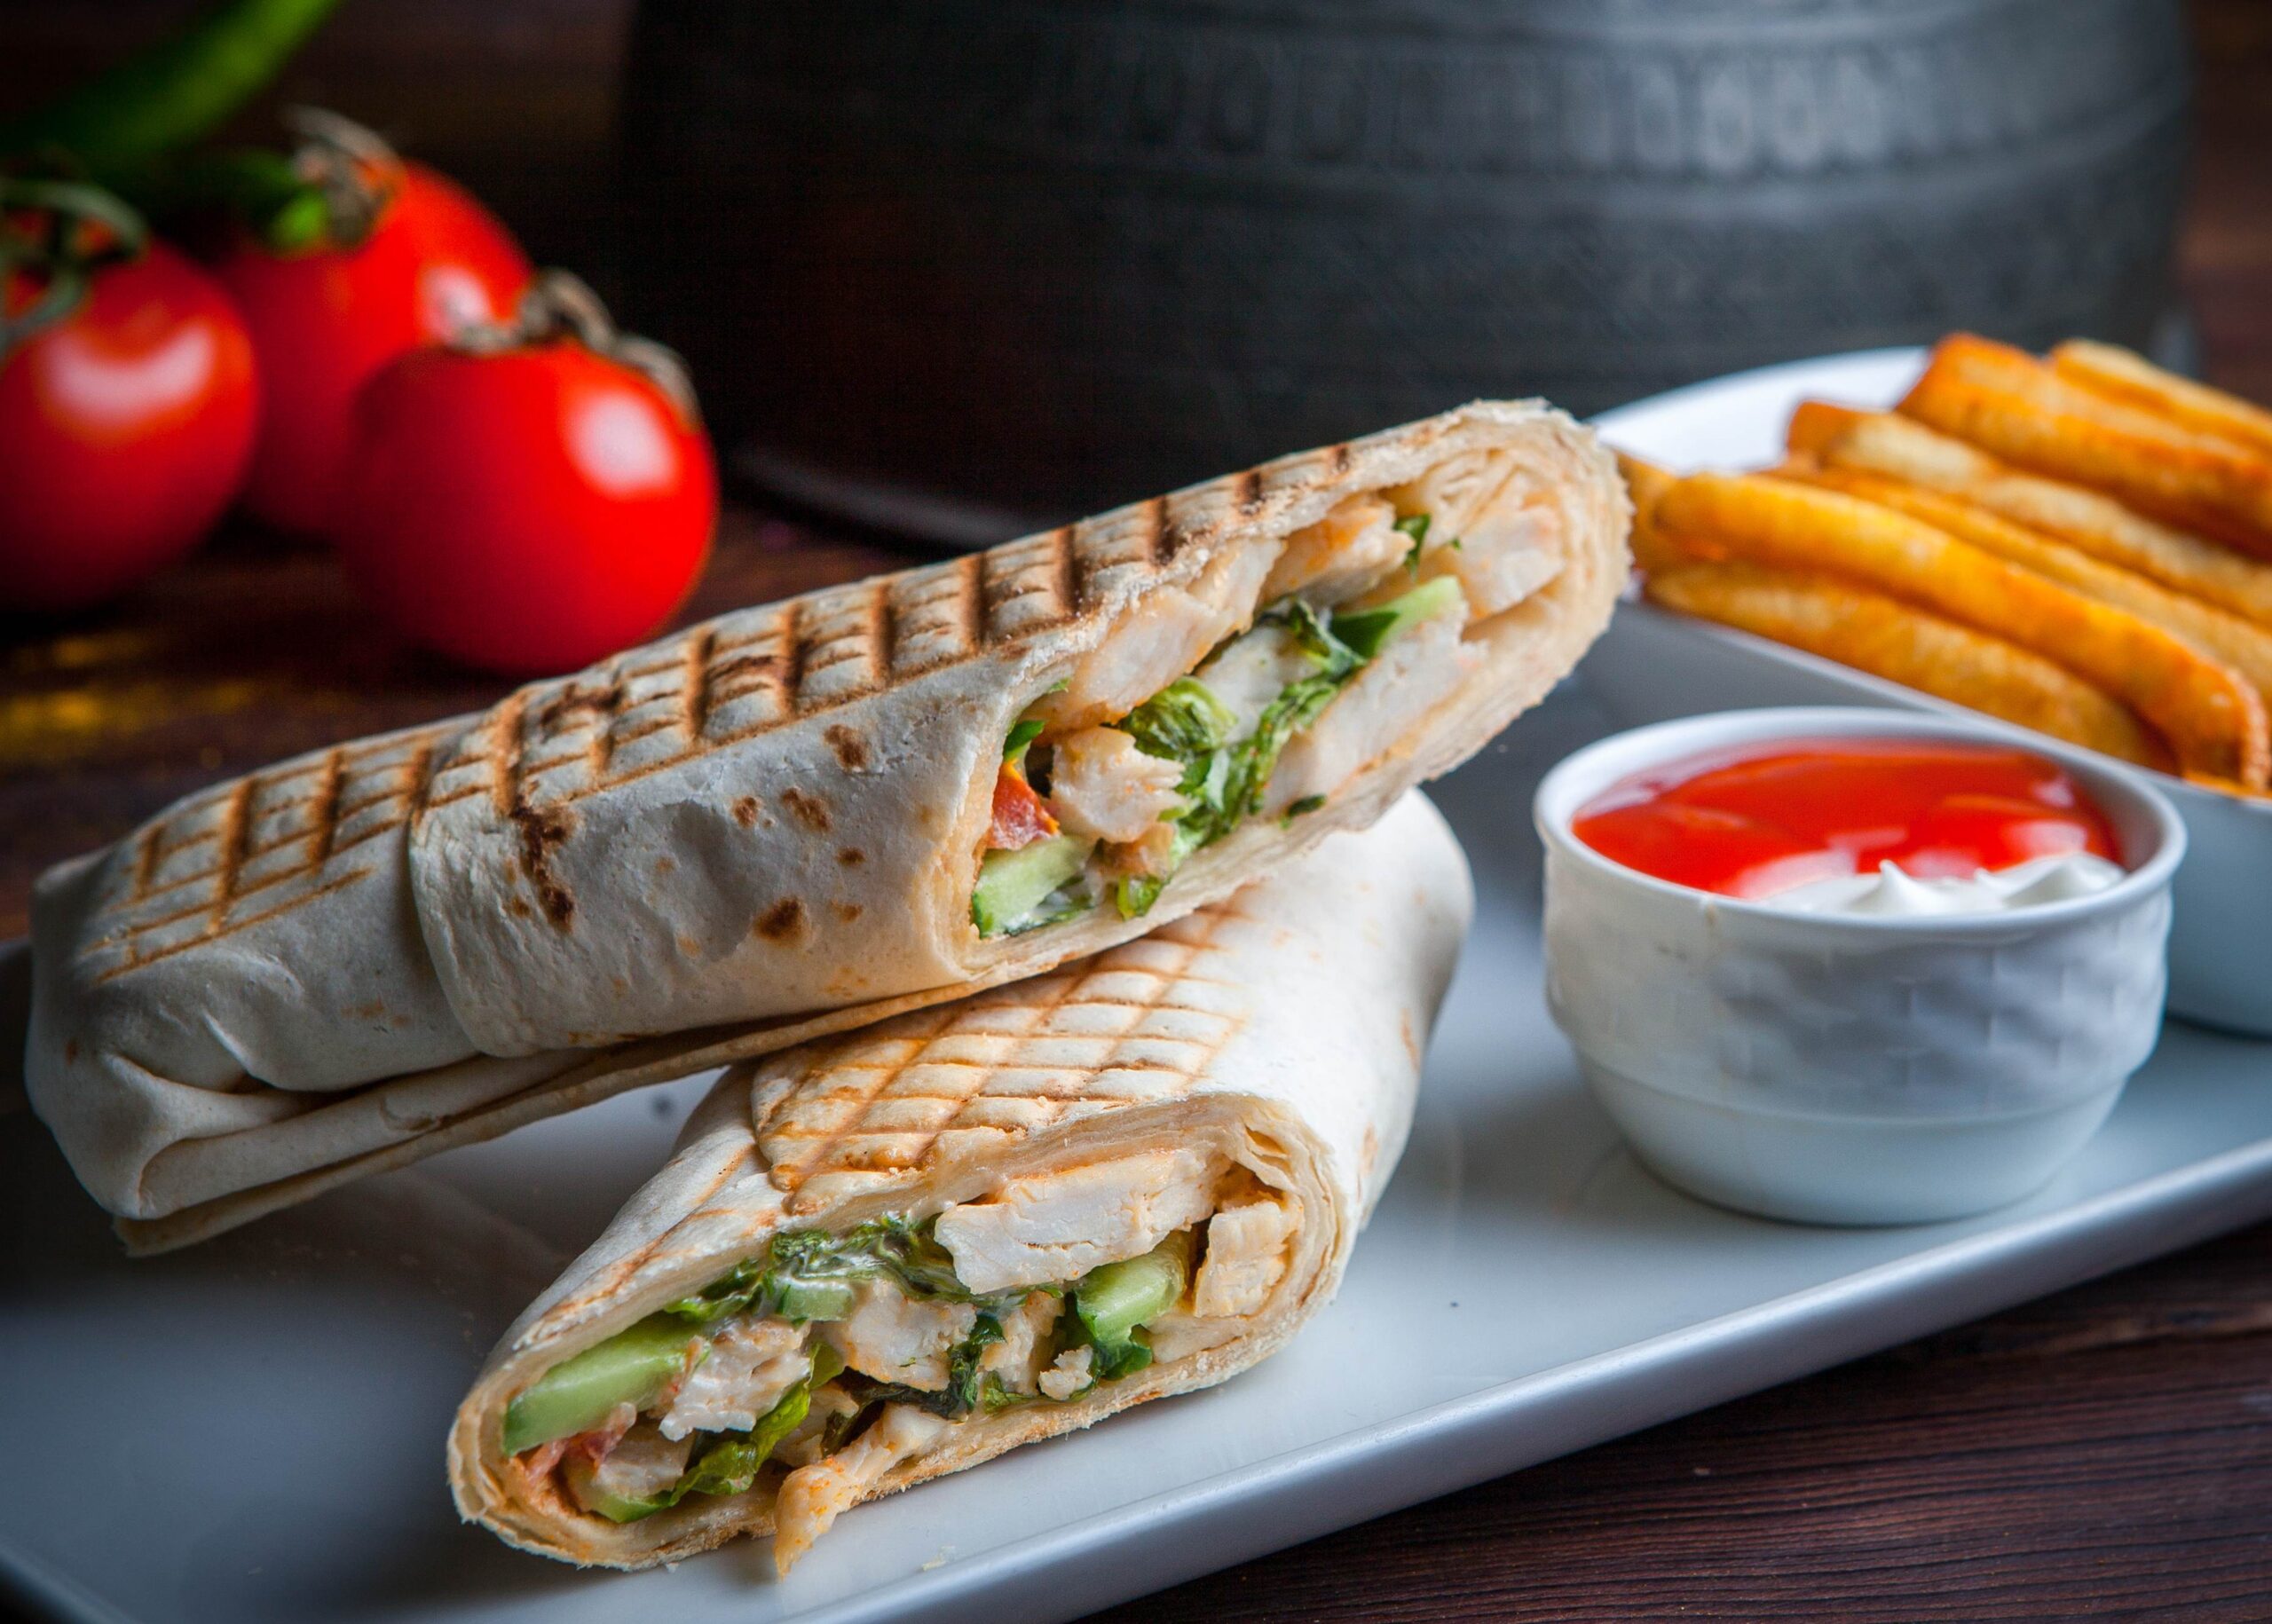 Lebanese Chicken Shawarma with Pita Bread and Fries